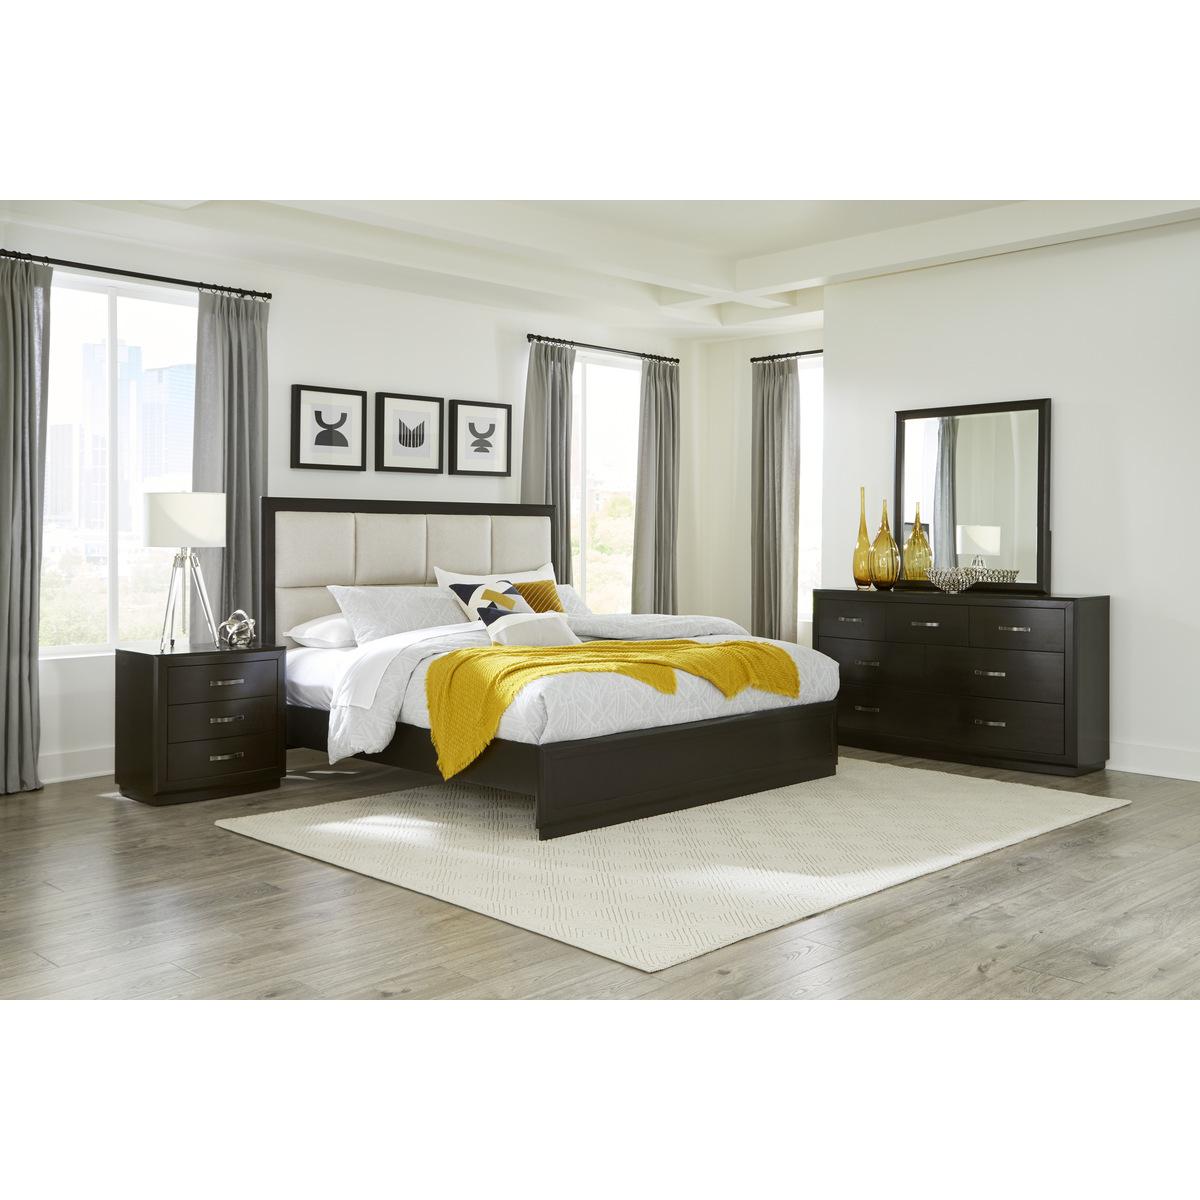 Transitional Bedroom Set 1575-1*5PC Hodgin 1575-1*5PC in Charcoal, Beige 